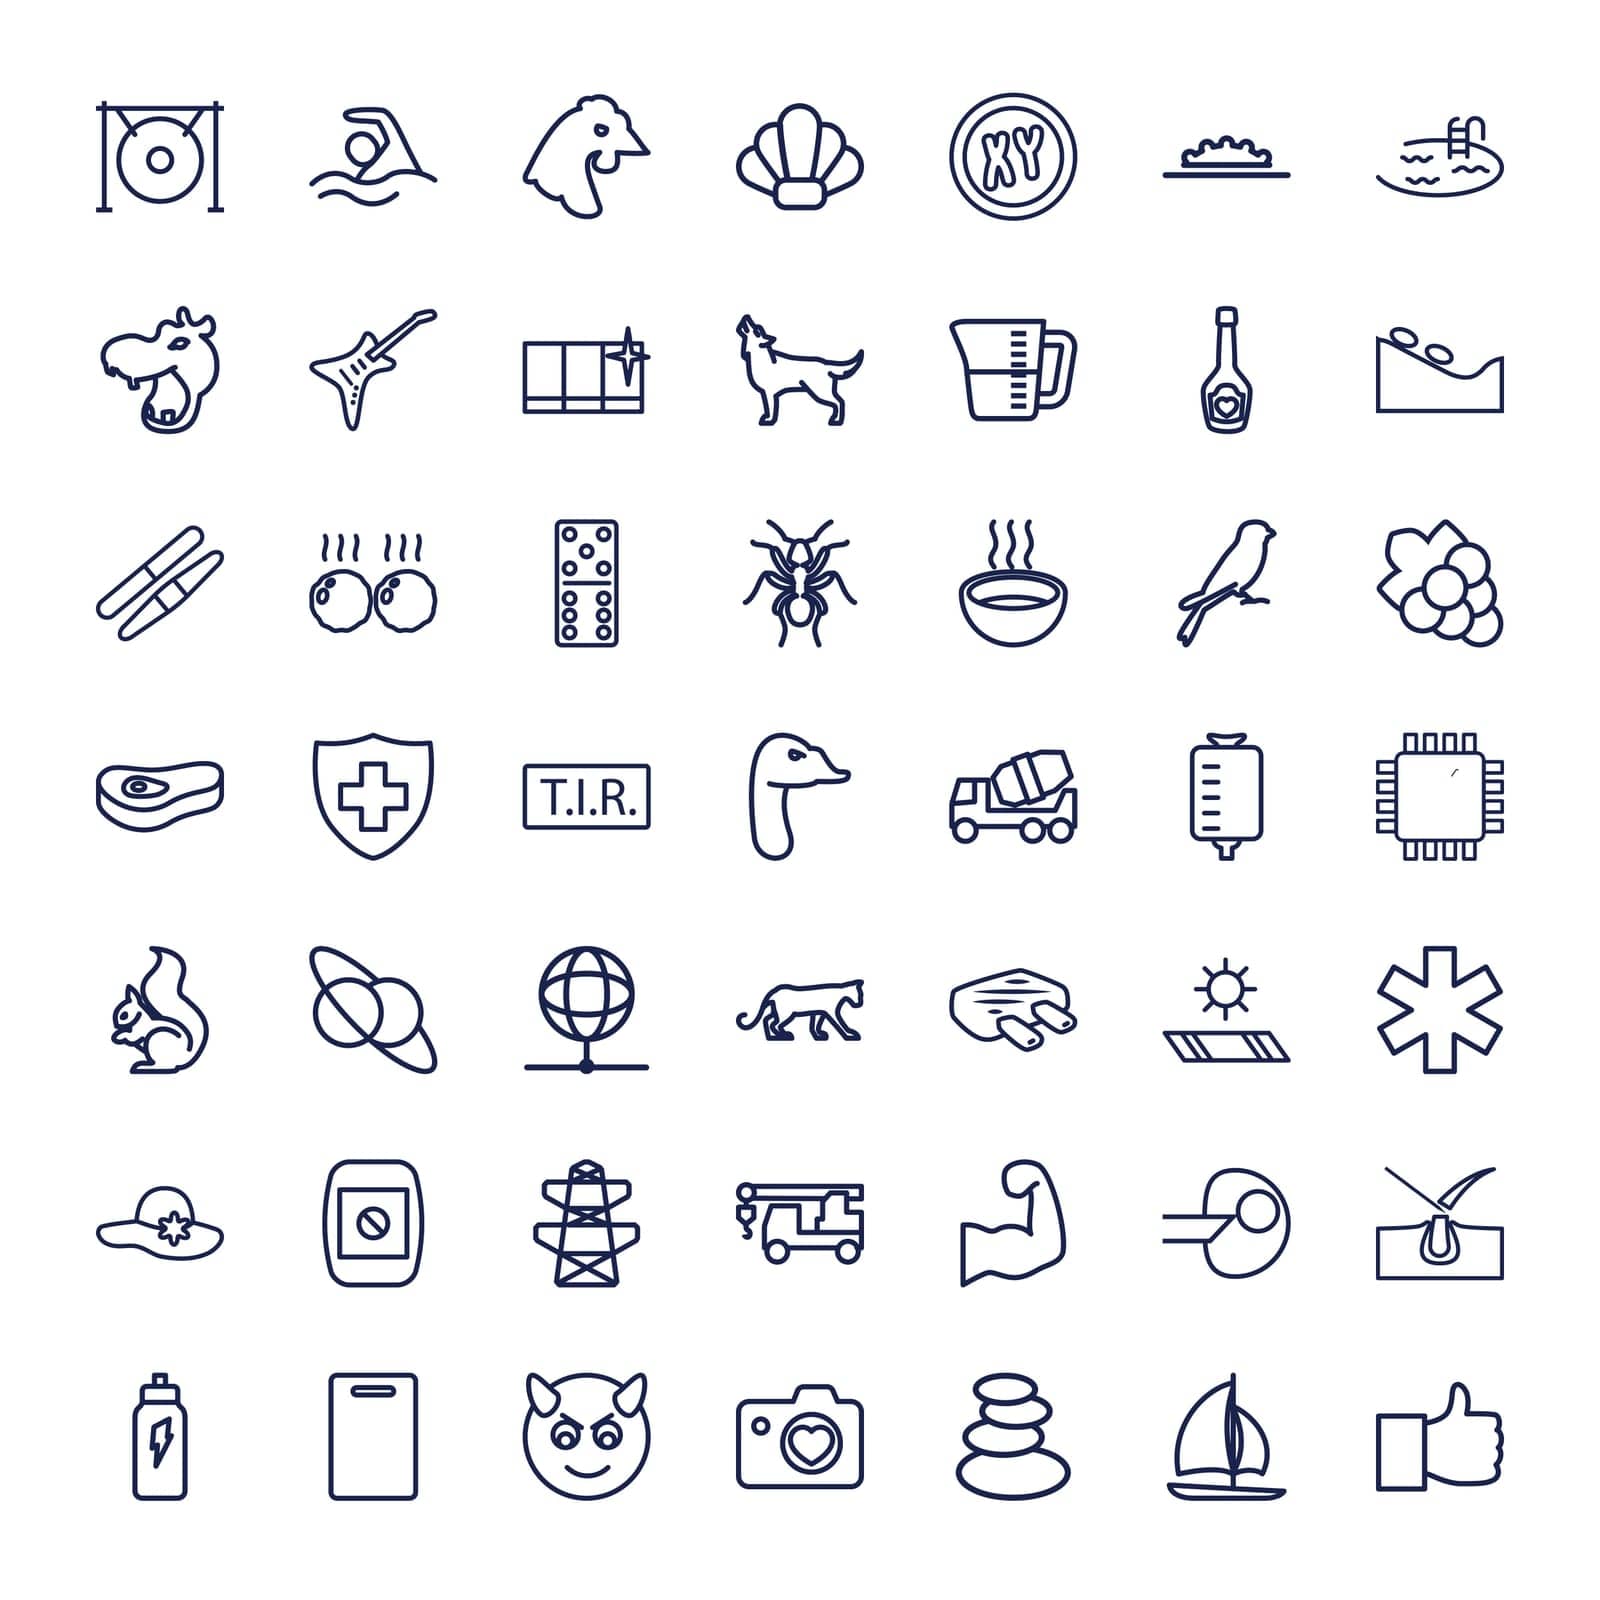 muscular,pylon,sailboat,medical,woman,truck,icon,skin,devil,sun,hair,hook,and,logo,hat,vector,satellite,camera,arm,shave,energetic,emot,set,like,spa,in,planet,display,drink,heart,the,core,with,globe,carpet,meat,cutting,panther,stones,board by ogqcorp